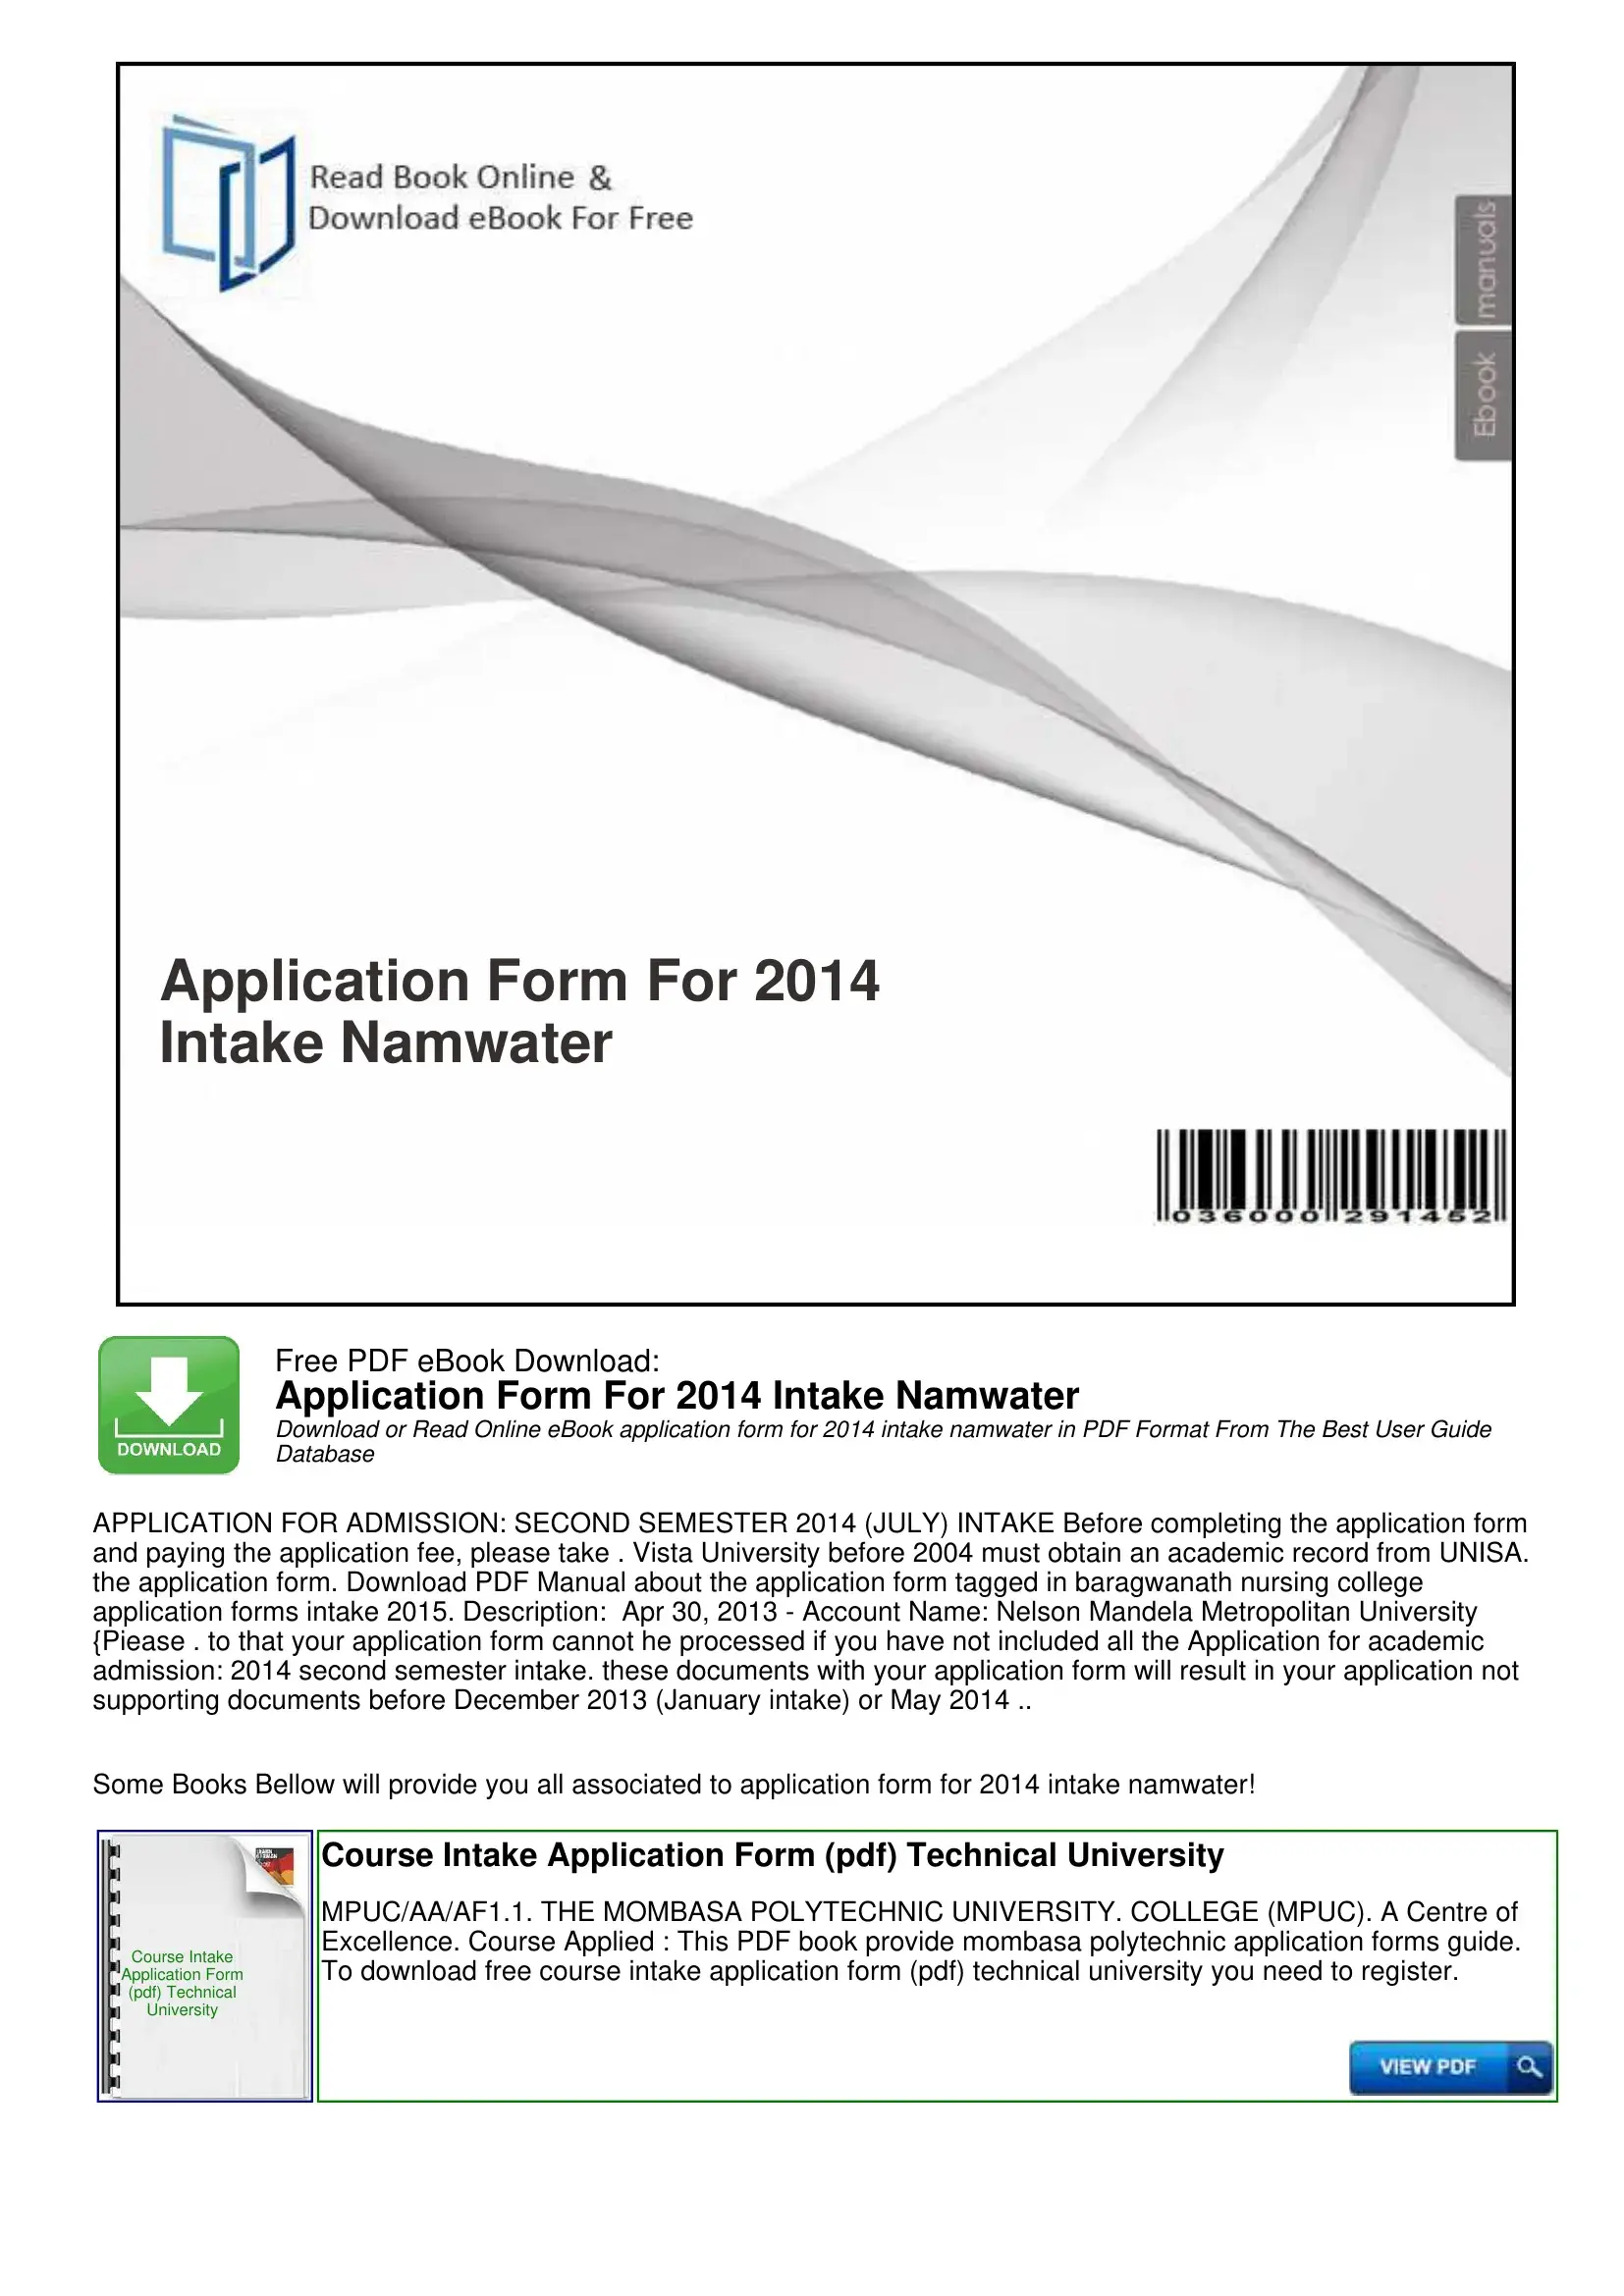 Namwater Application Form Preview